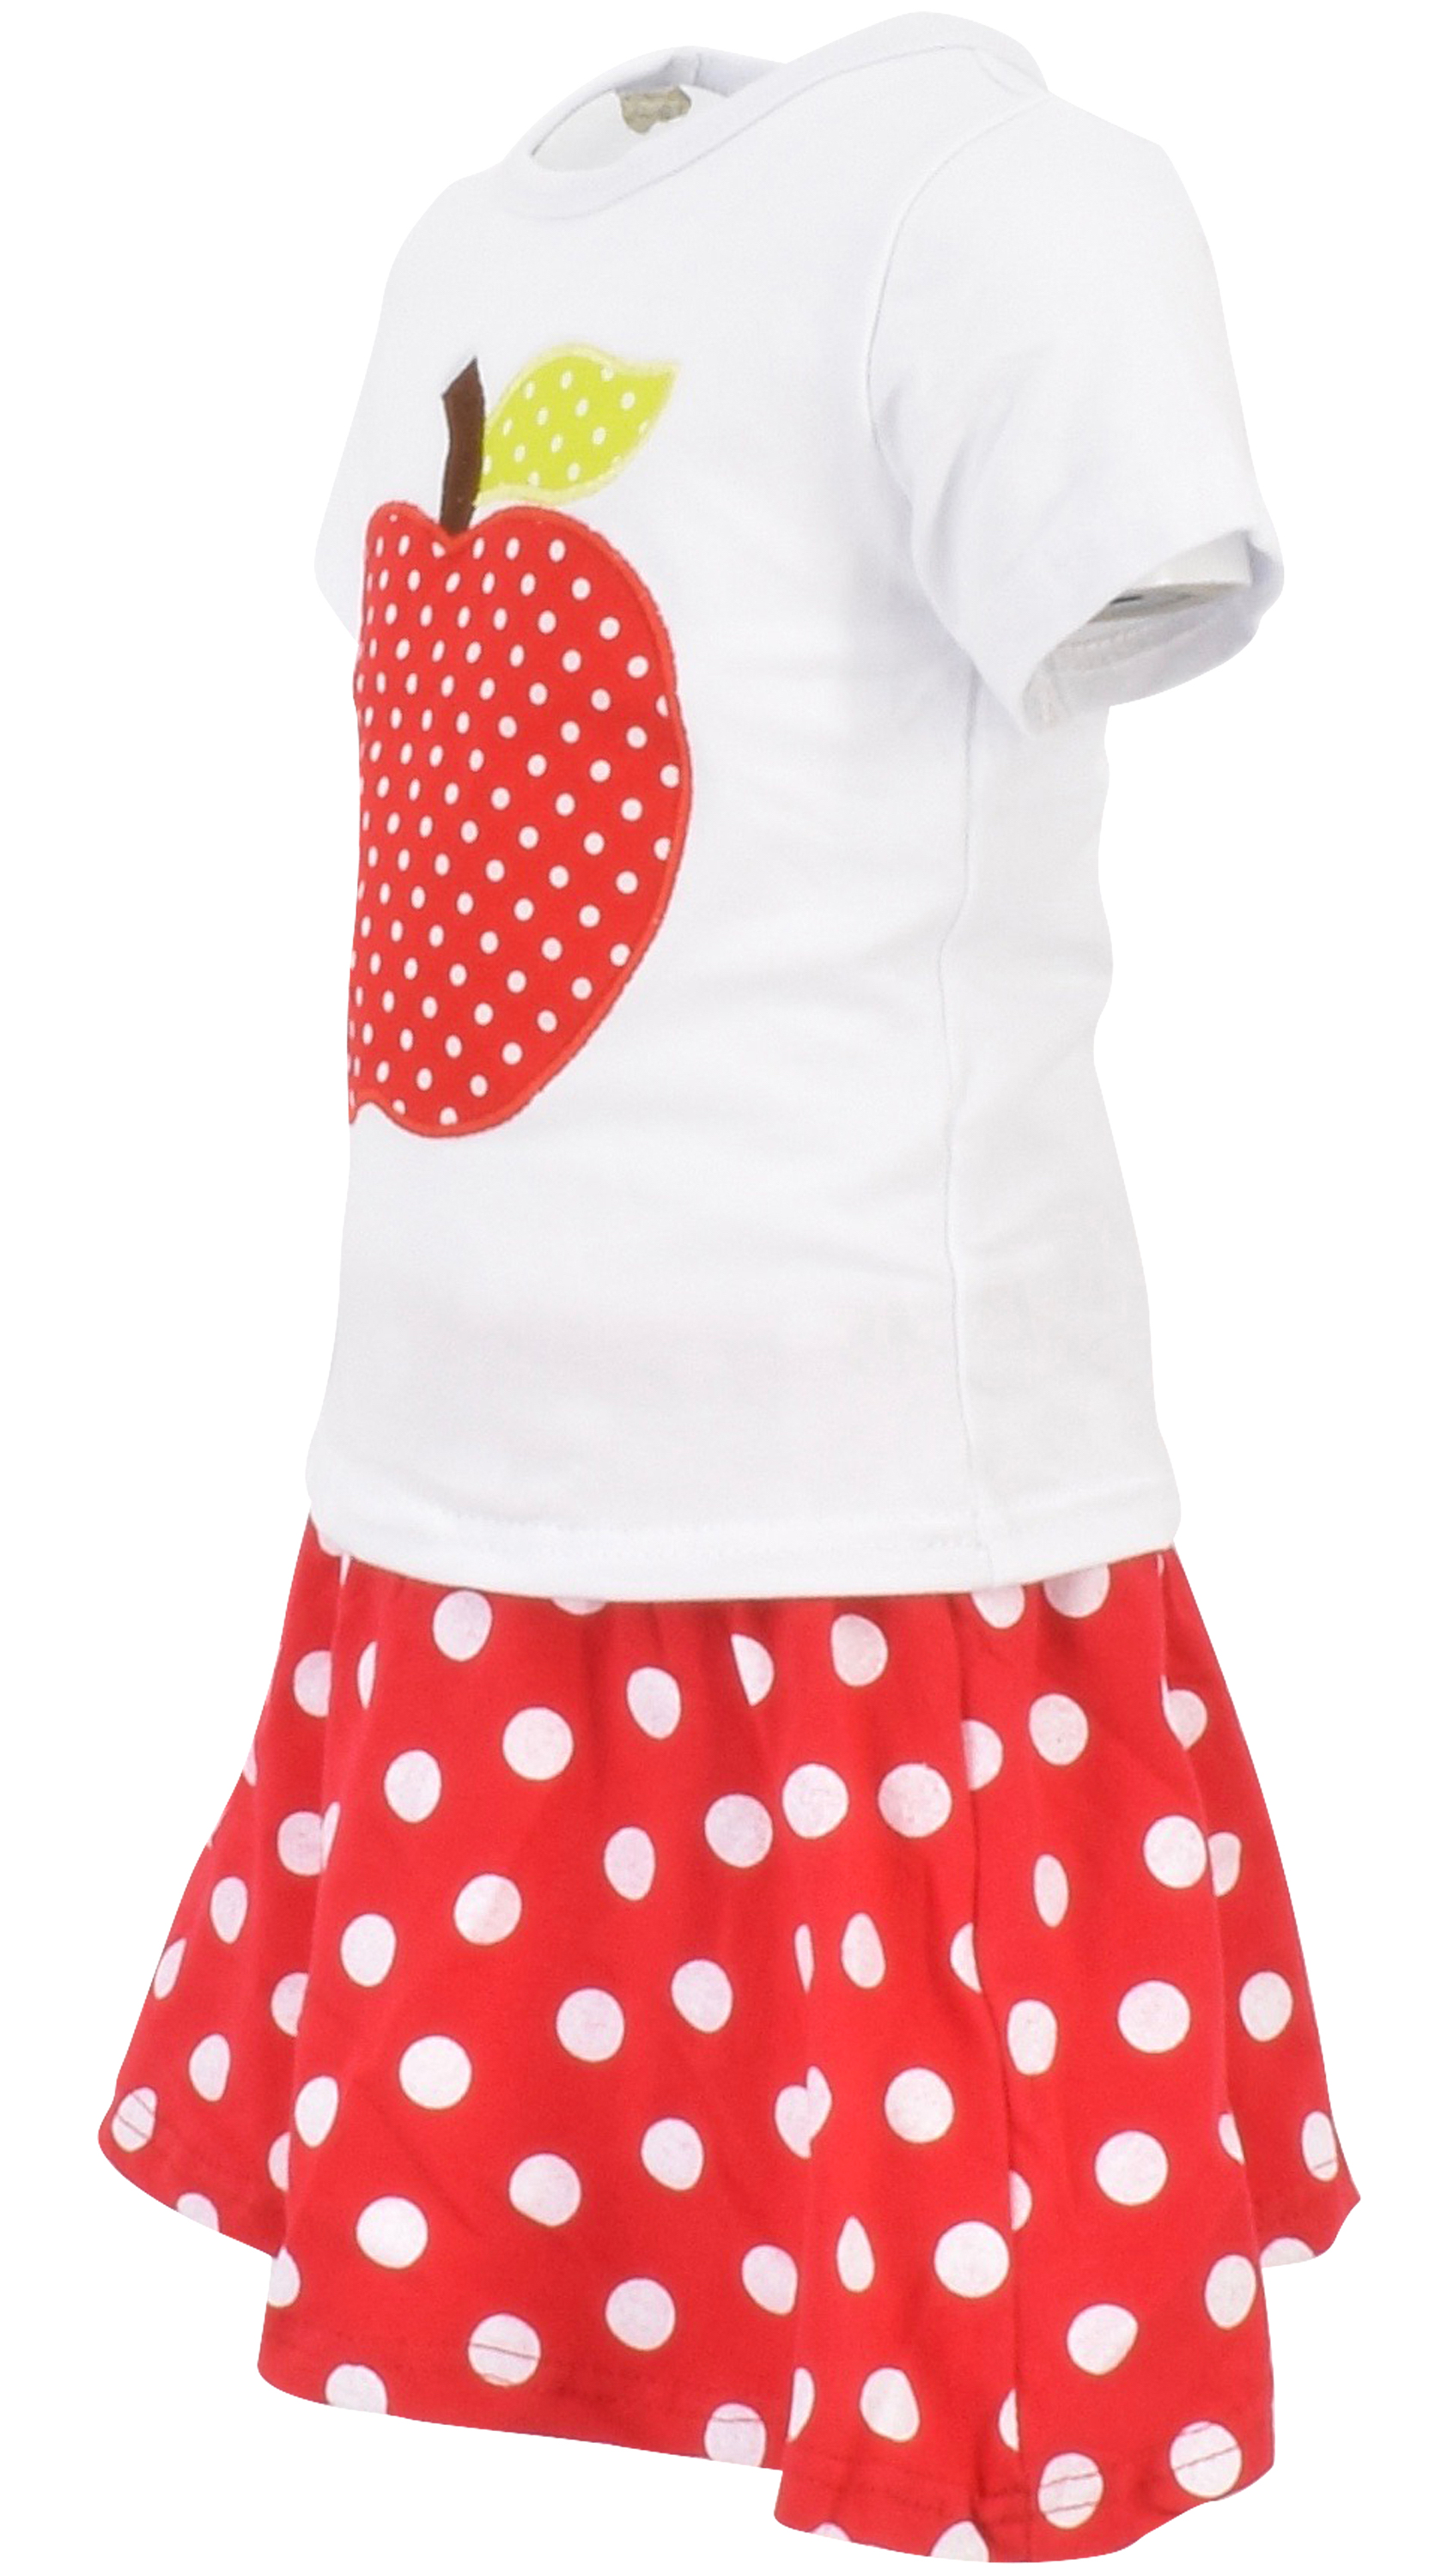 Unique Baby Girls Back to School Apple Skirt Boutique Outfit (4T/M, Red) - image 2 of 4